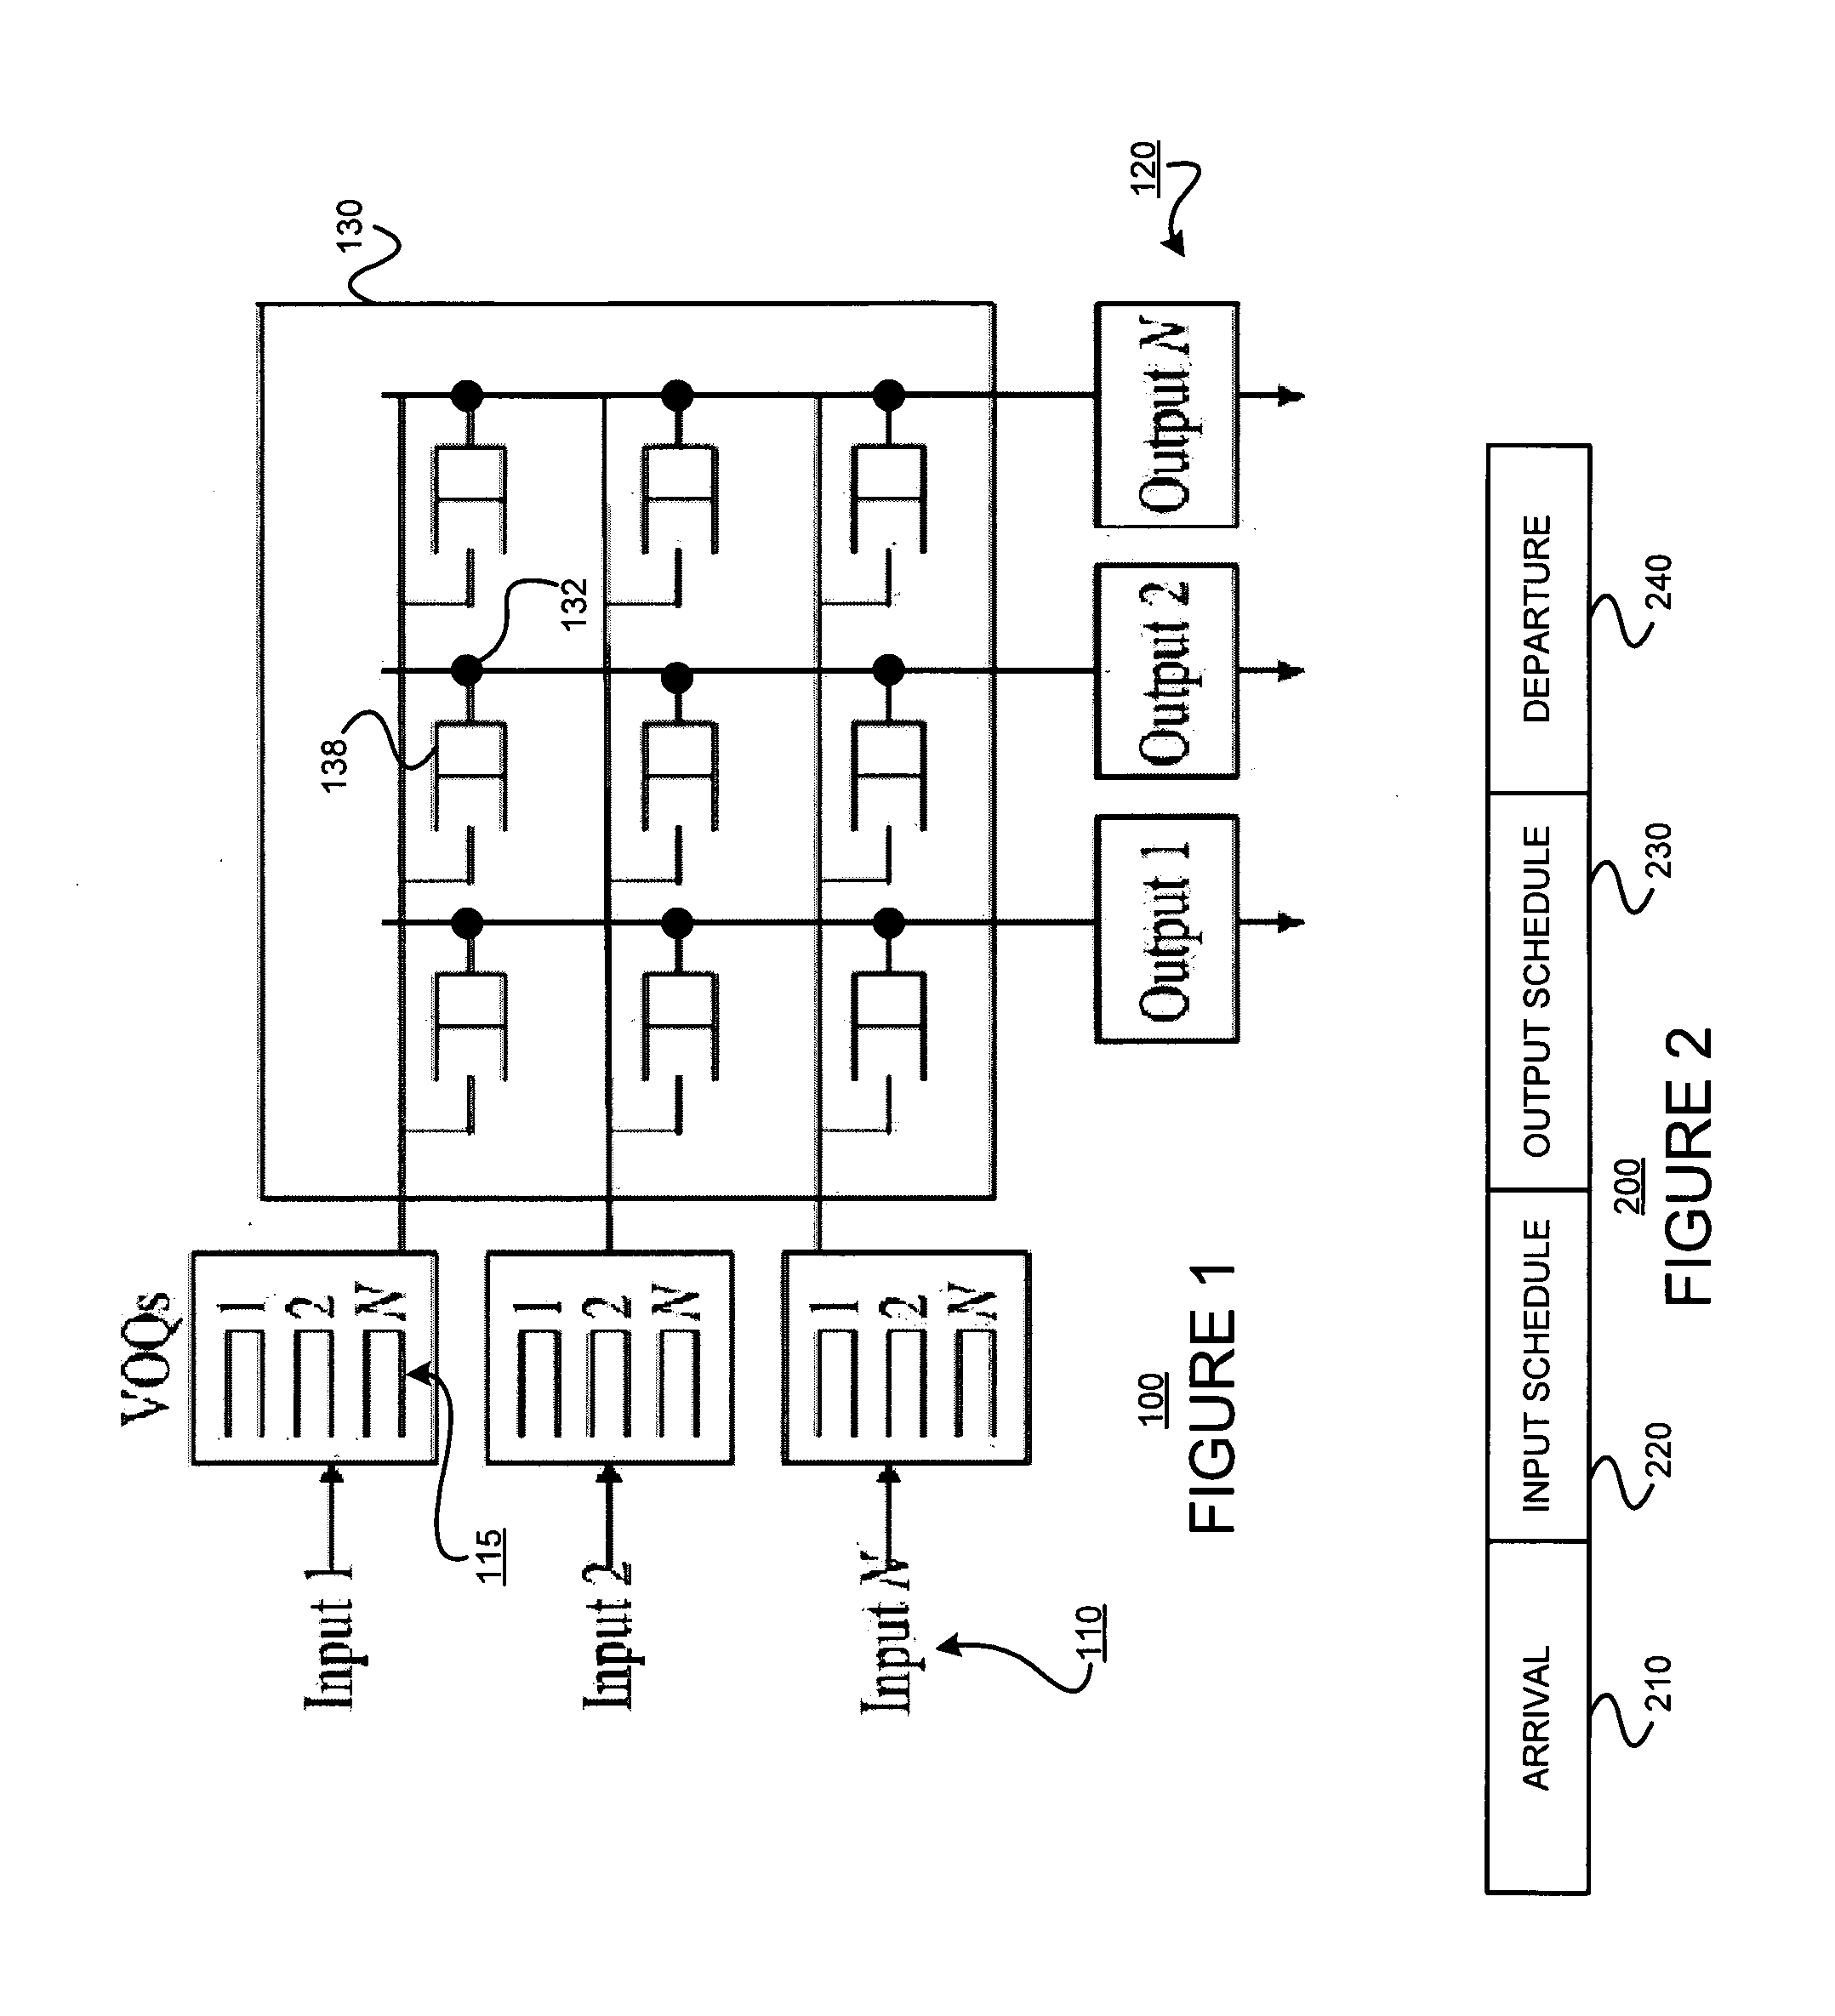 Low complexity scheduling algorithm for a buffered crossbar switch with 100% throughput